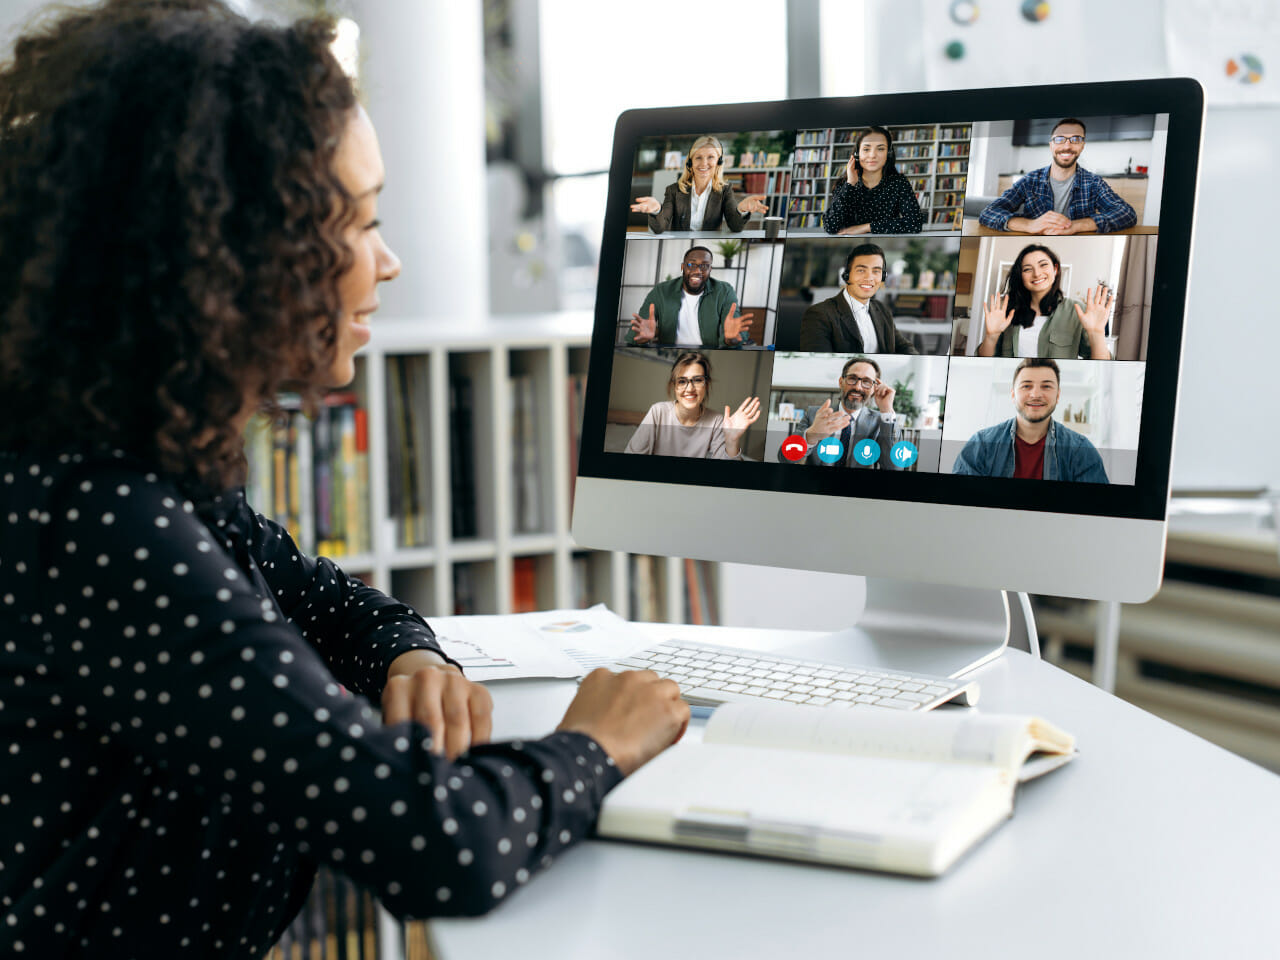 A woman sitting in front of a computer with several people on a video conference.